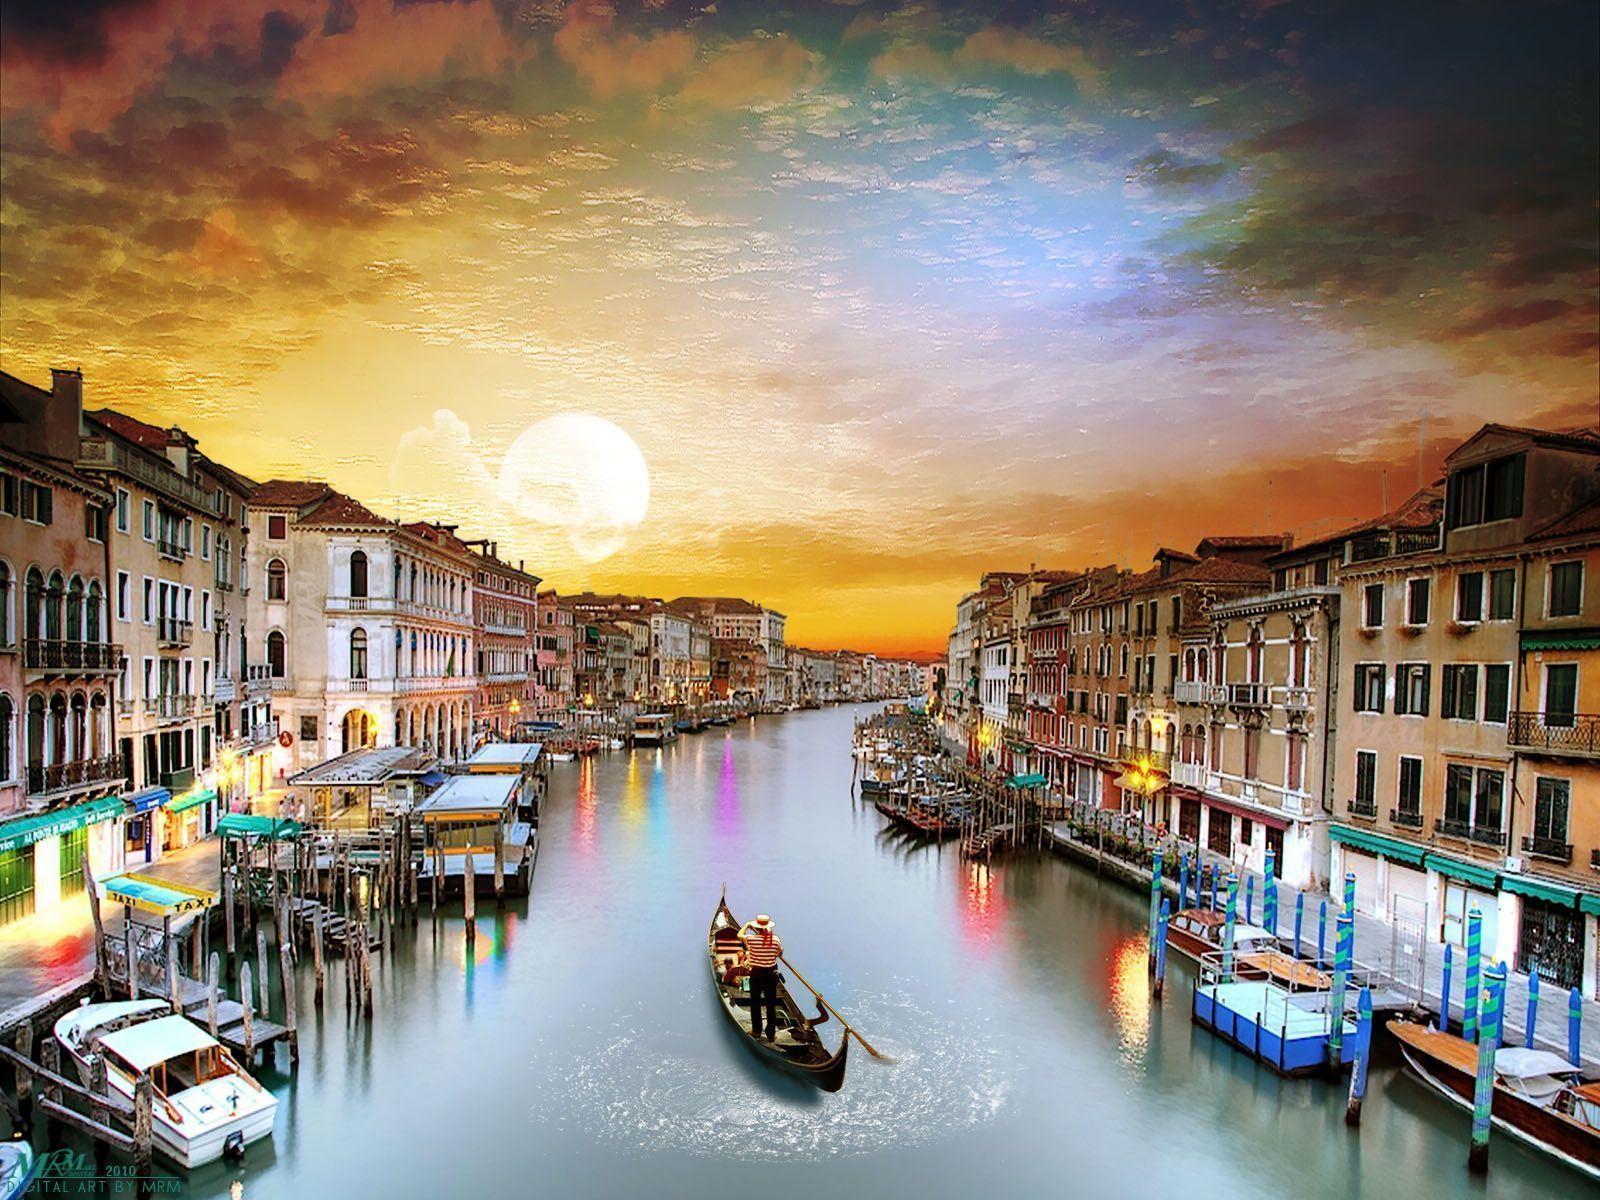 All About The Famous Places: Venice Italy Wallpaper 2012